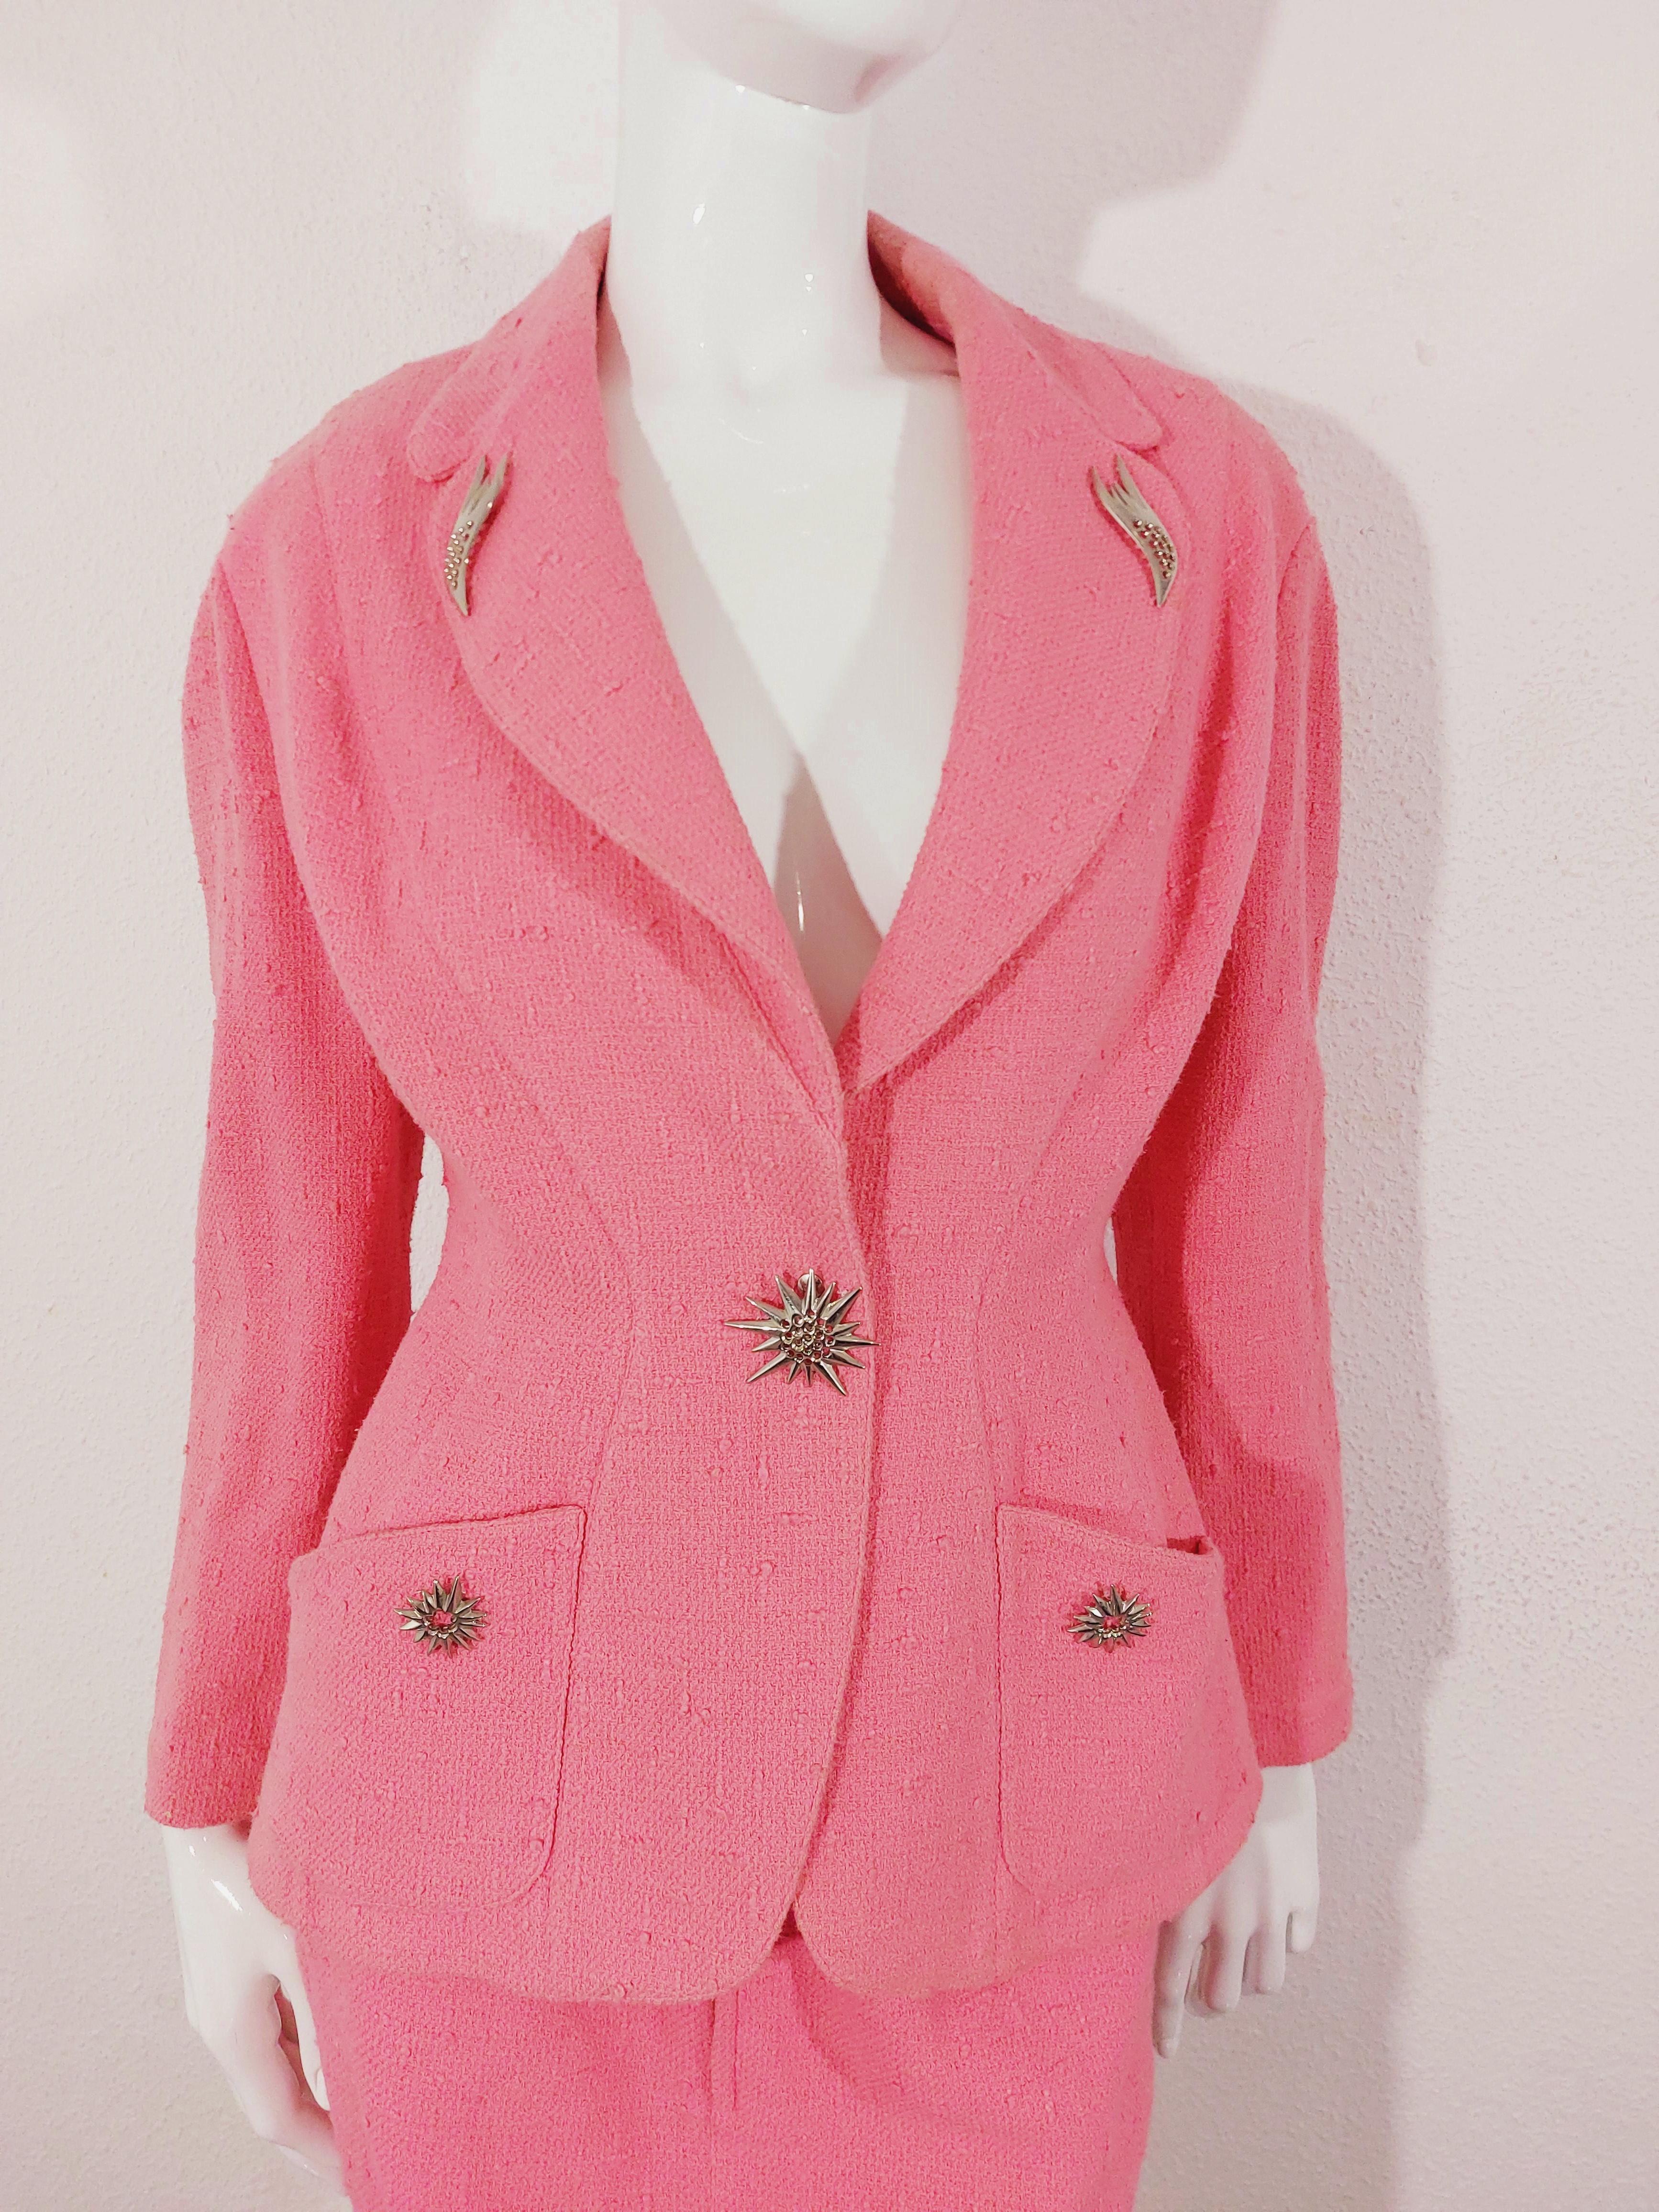 Women's Thierry Mugler Couture Brooch FW 1990 Pin Pink Badge Blazer Skirt Suit Set For Sale